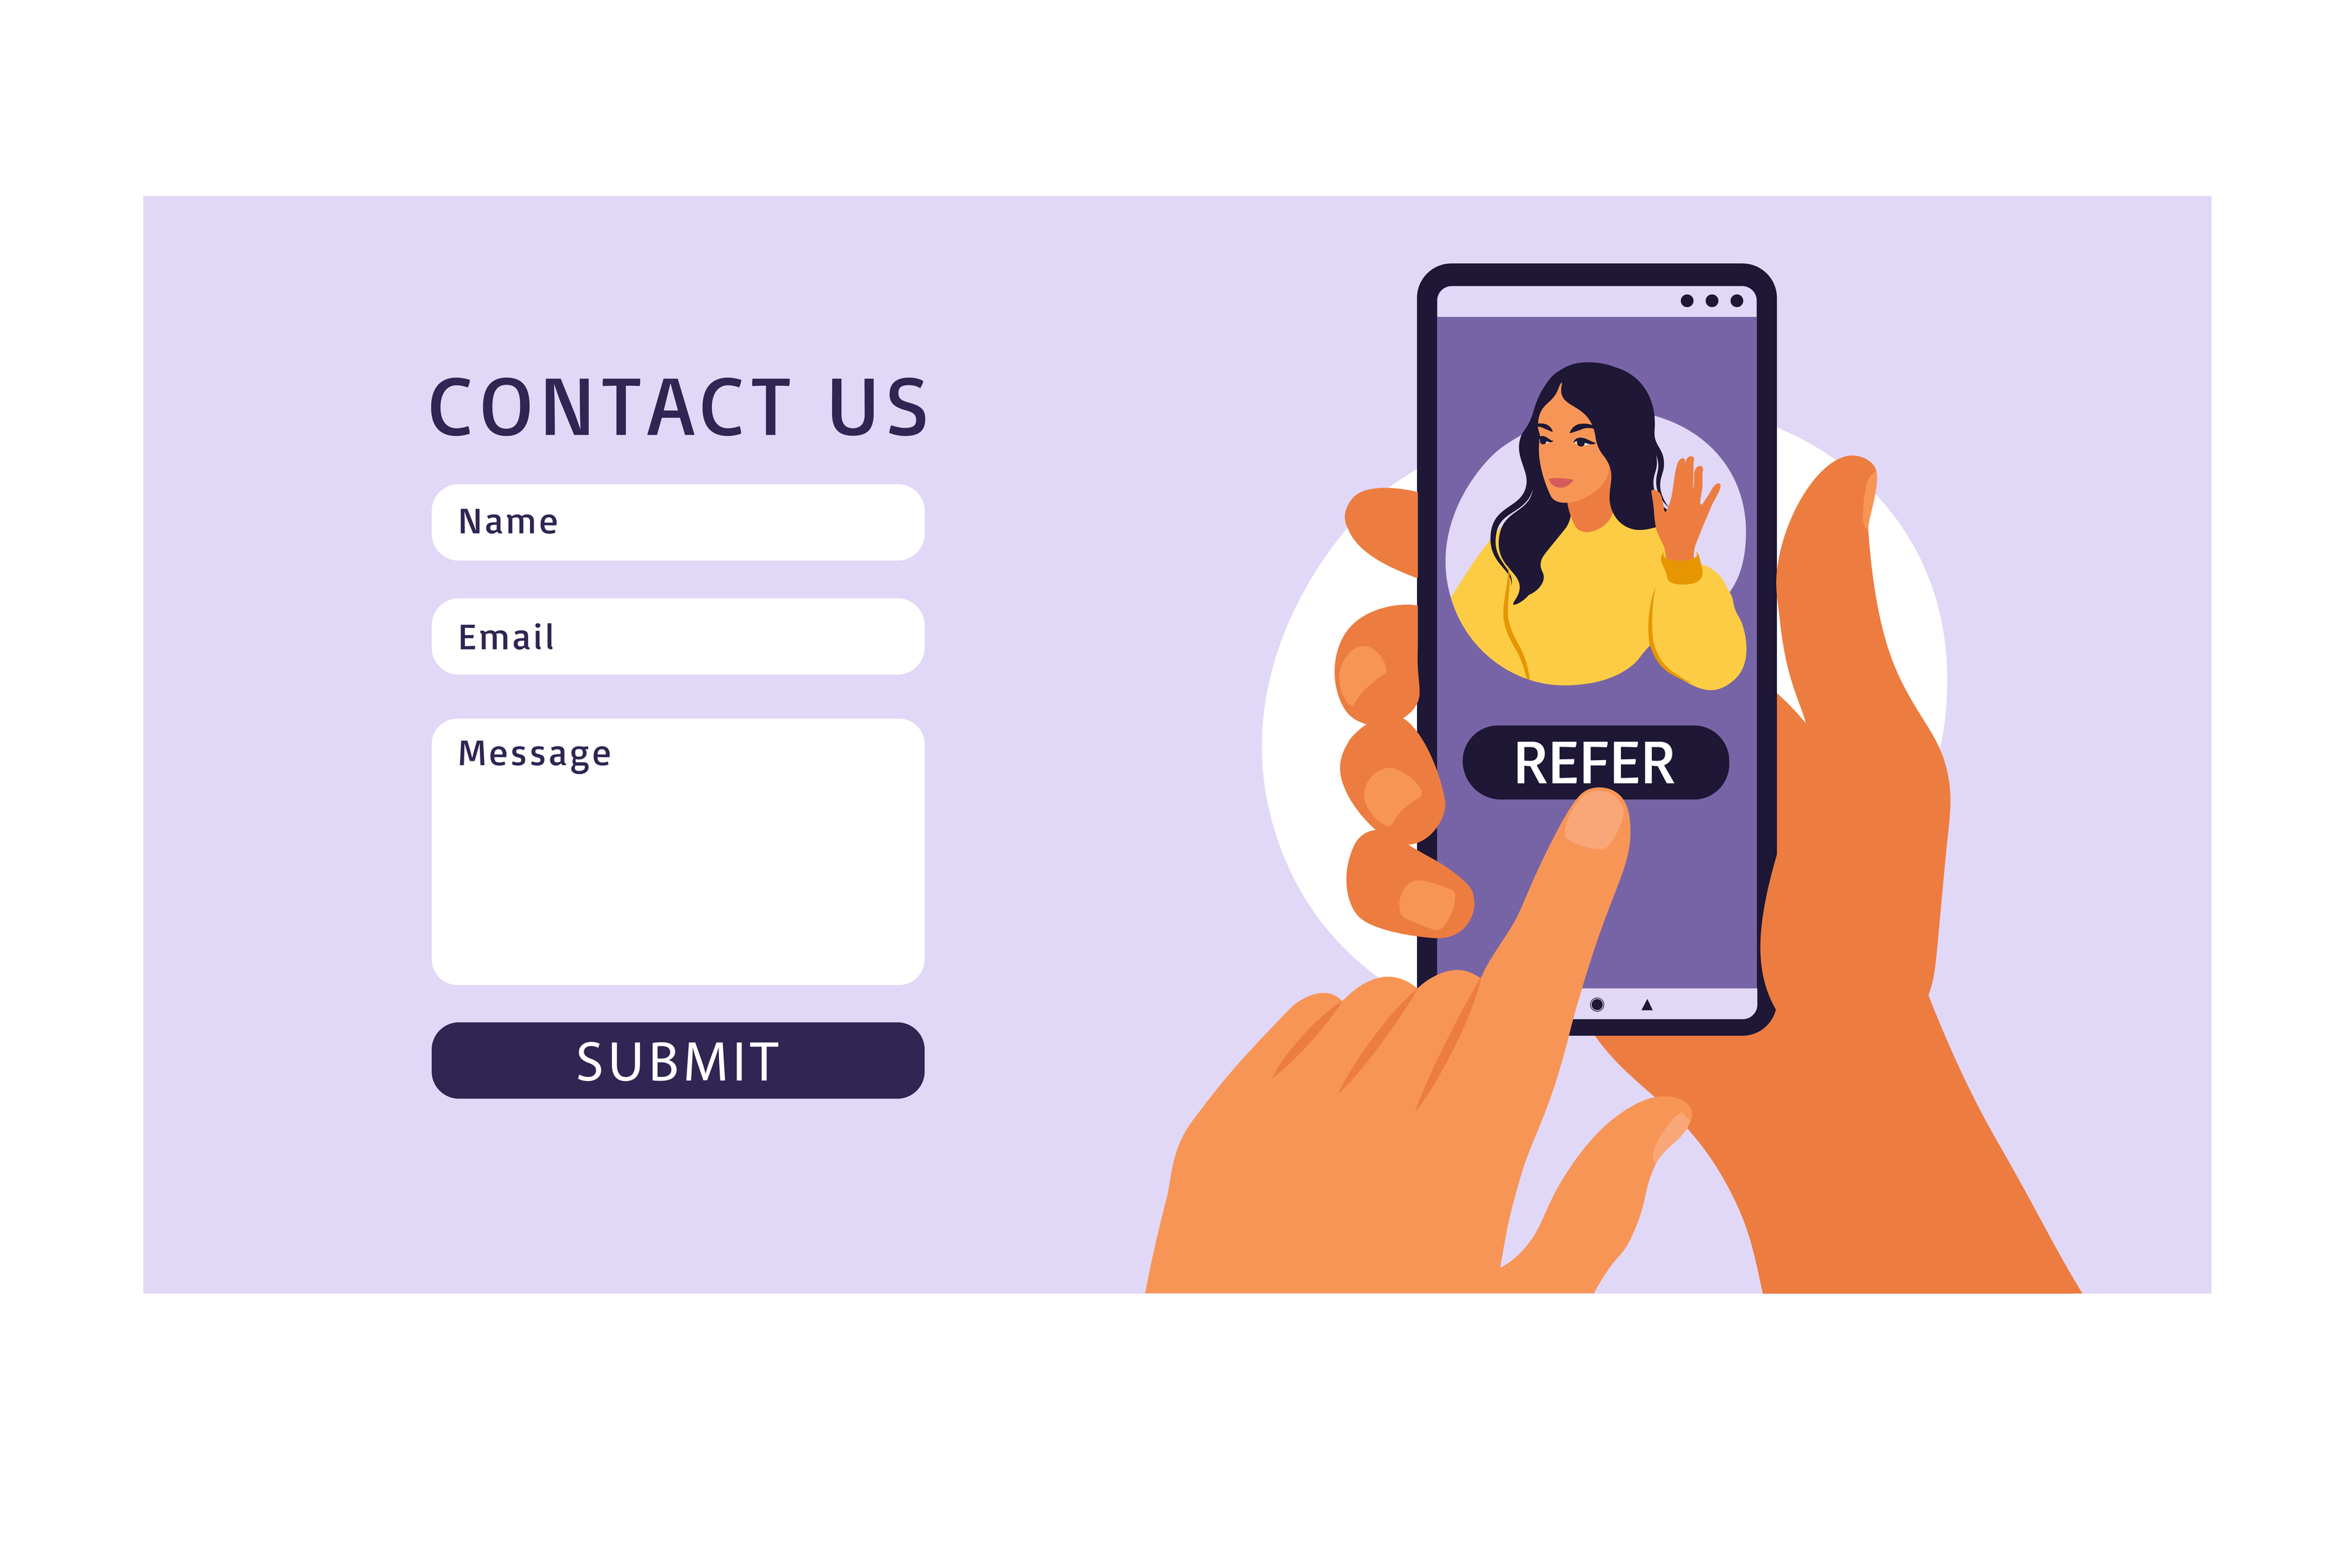 contact-us-form-template-for-web-hands-holding-smartphone-with-a-woman-social-media-profile-or